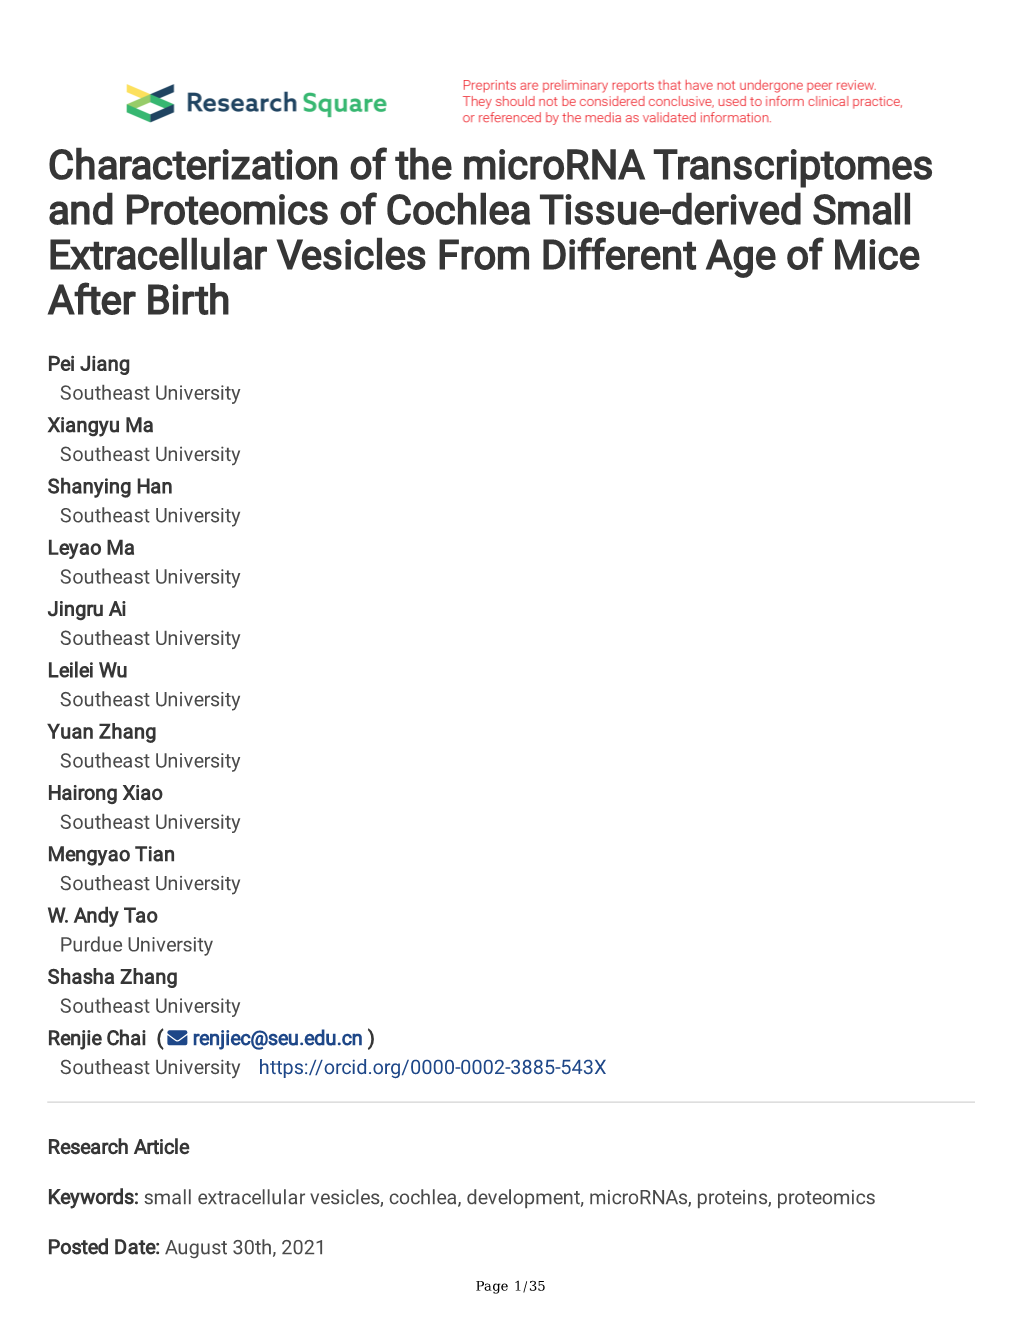 Characterization of the Microrna Transcriptomes and Proteomics of Cochlea Tissue-Derived Small Extracellular Vesicles from Different Age of Mice After Birth